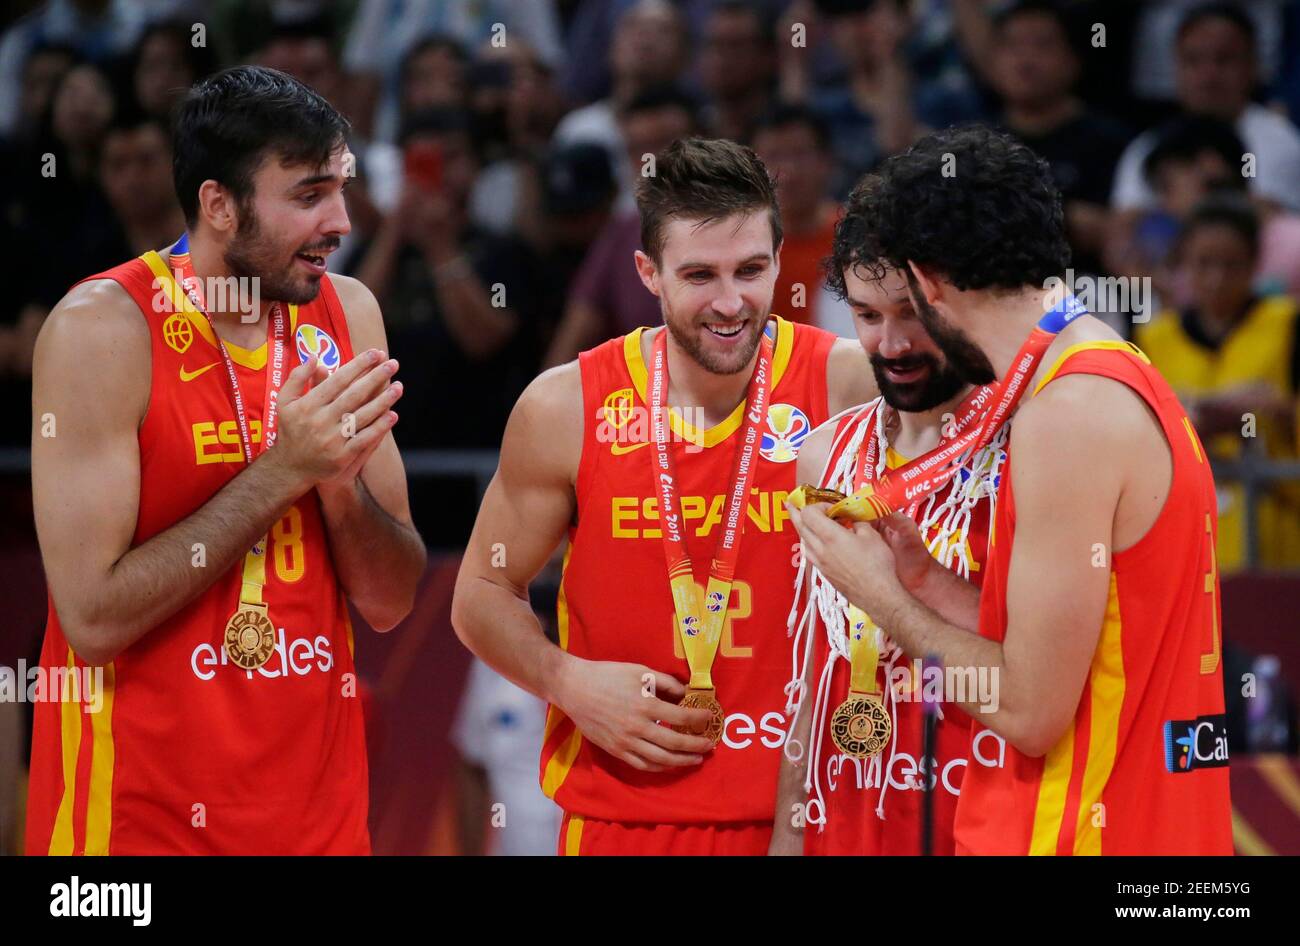 Basketball - FIBA World Cup - Final - Argentina v Spain - Wukesong Sport Arena, Beijing, China - September 15, 2019   Spain's Pierre Oriola, Xavier Rabaseda, Sergio Llull and Javier Beiran celebrate after winning the FIBA World Cup REUTERS/Jason Lee Stock Photo